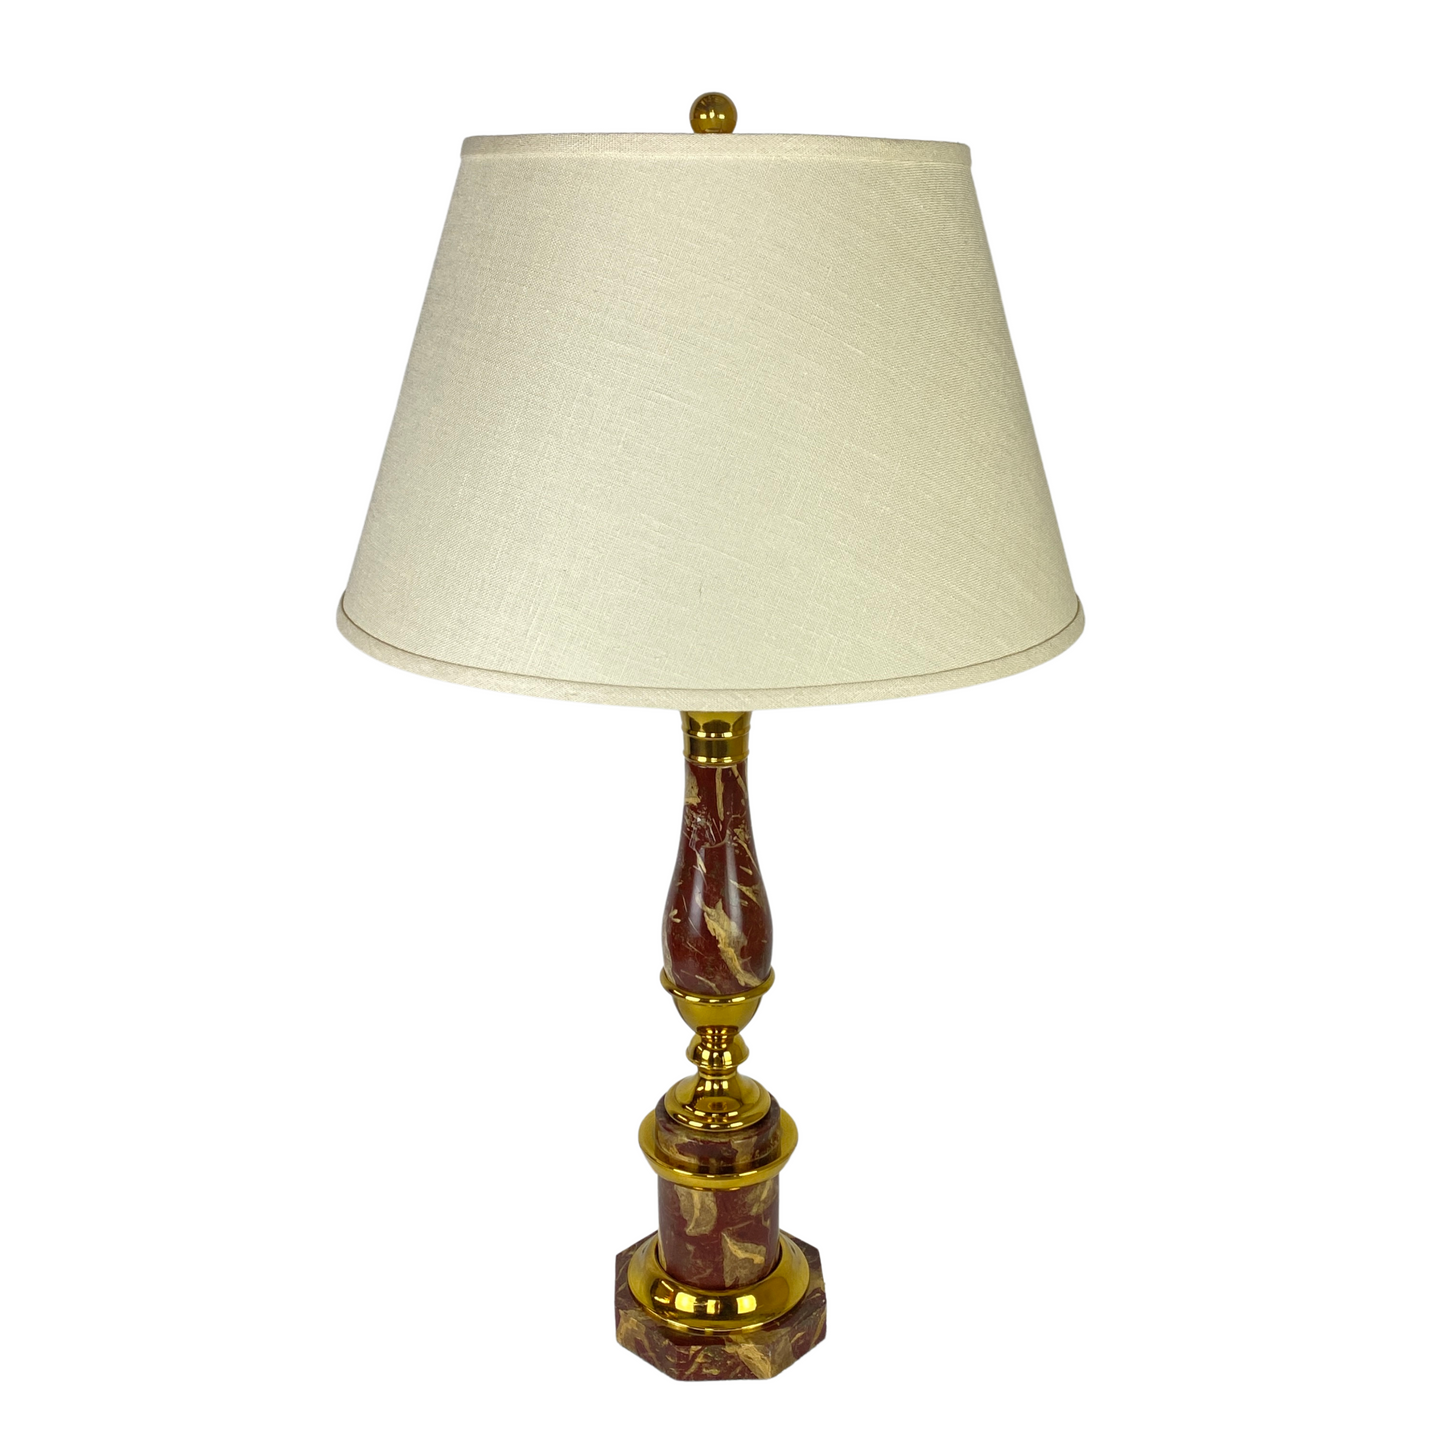 Vintage Faux Marble & Brass Table Lamp